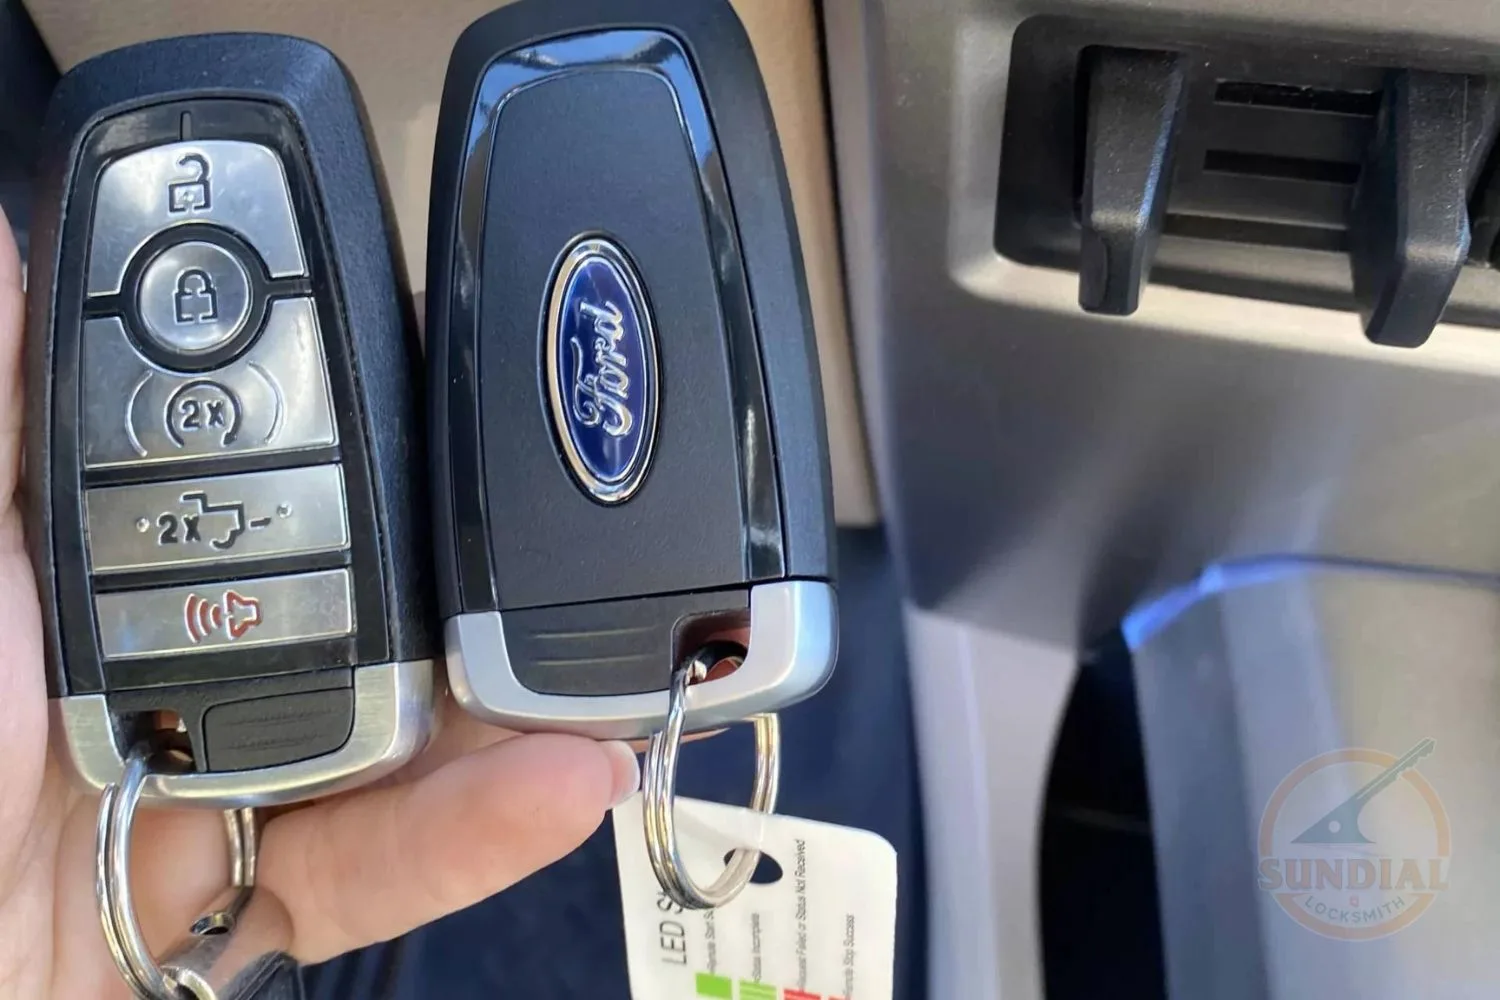 Hand holding Ford car keys with remote controls.